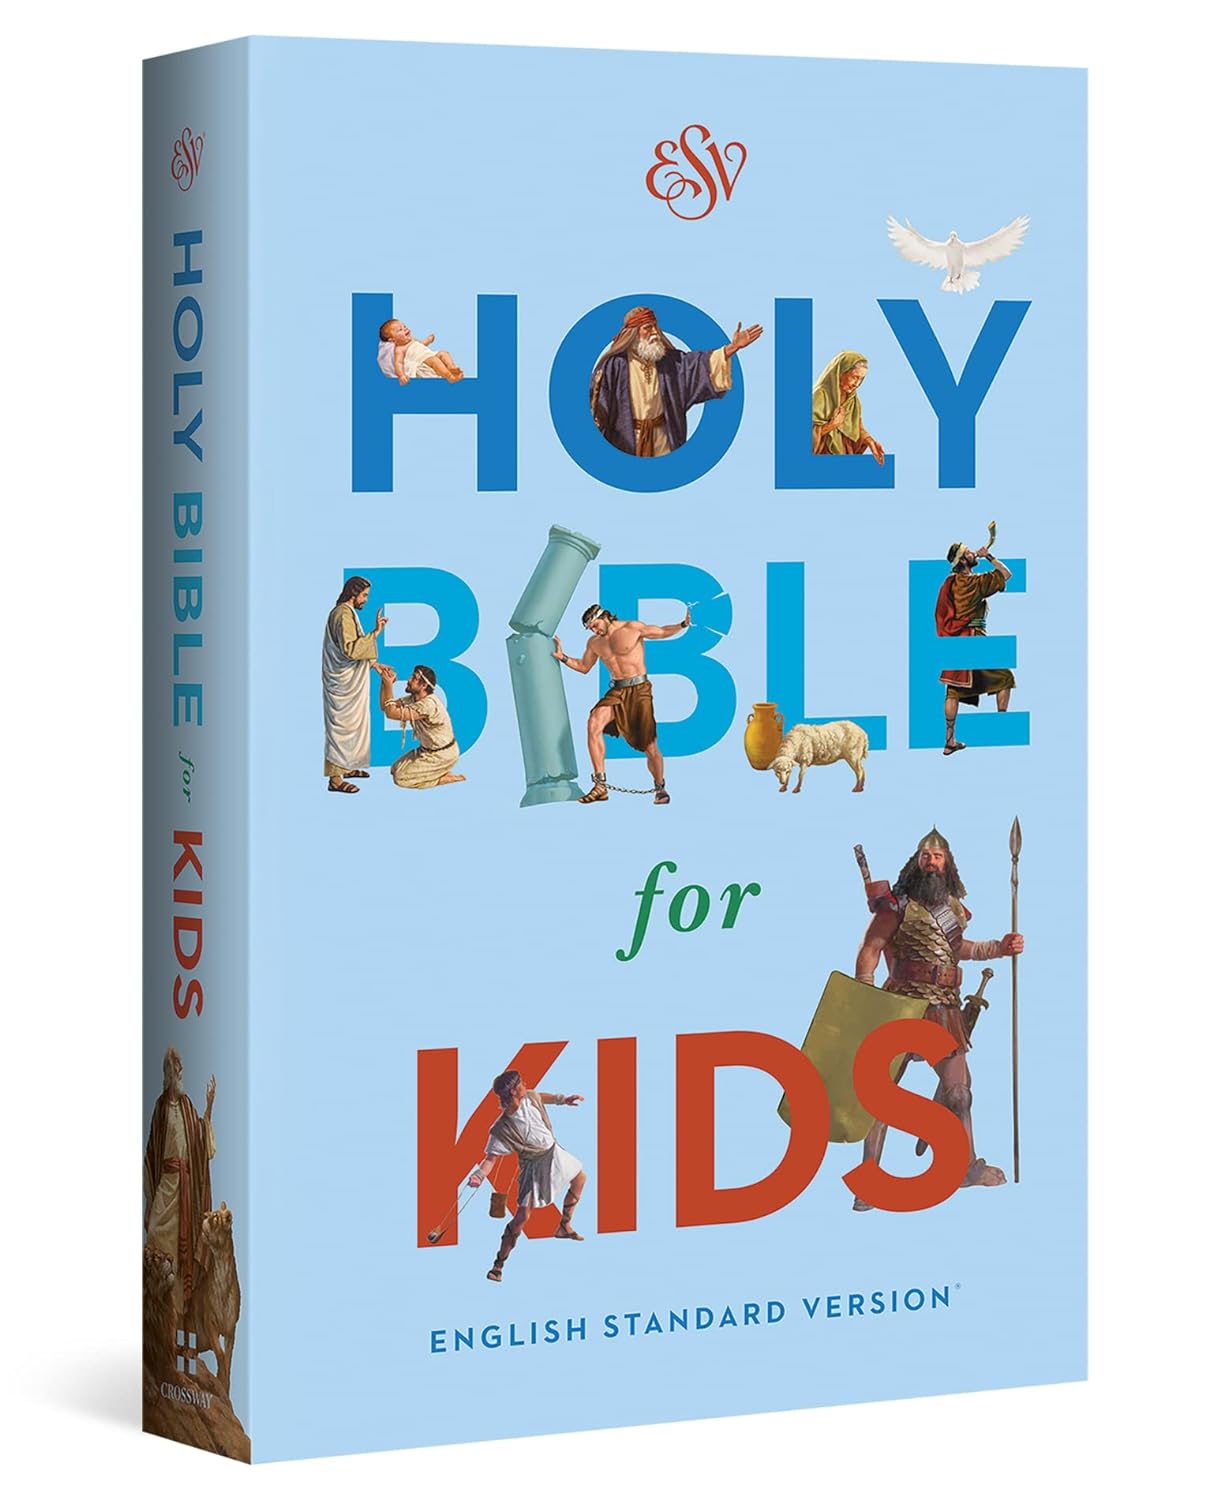 Holy Bible for Kids in the ESV translation